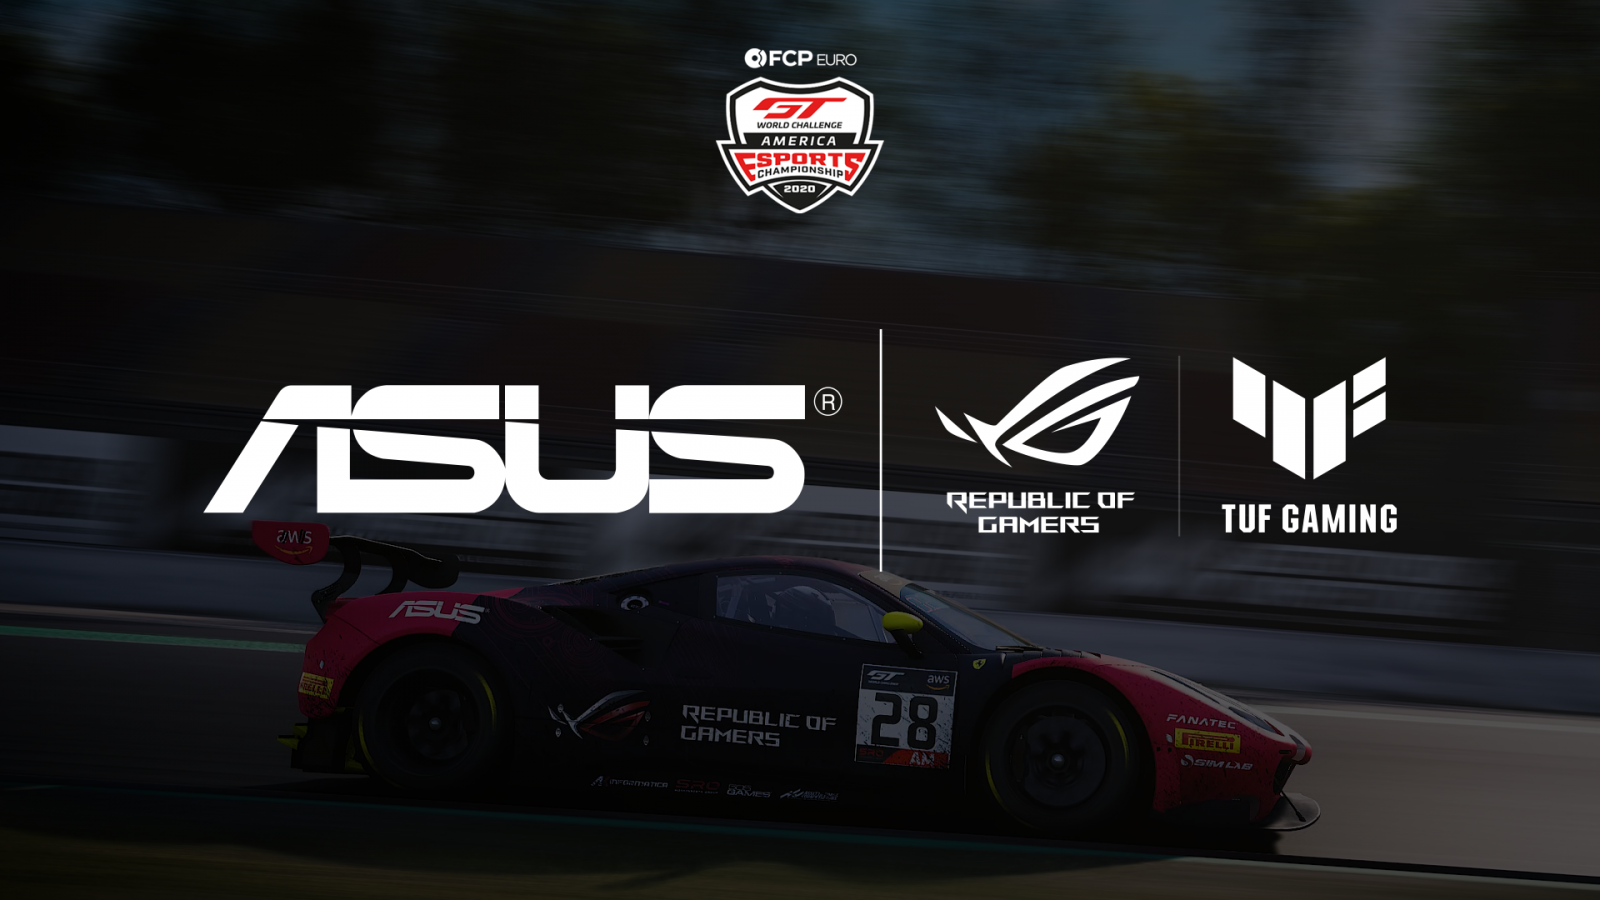 ASUS Republic of Gamers and TUF Gaming Rejoin Season 2 as Official Hardware Partner of FCP Euro GT World Challenge America Esports Championship